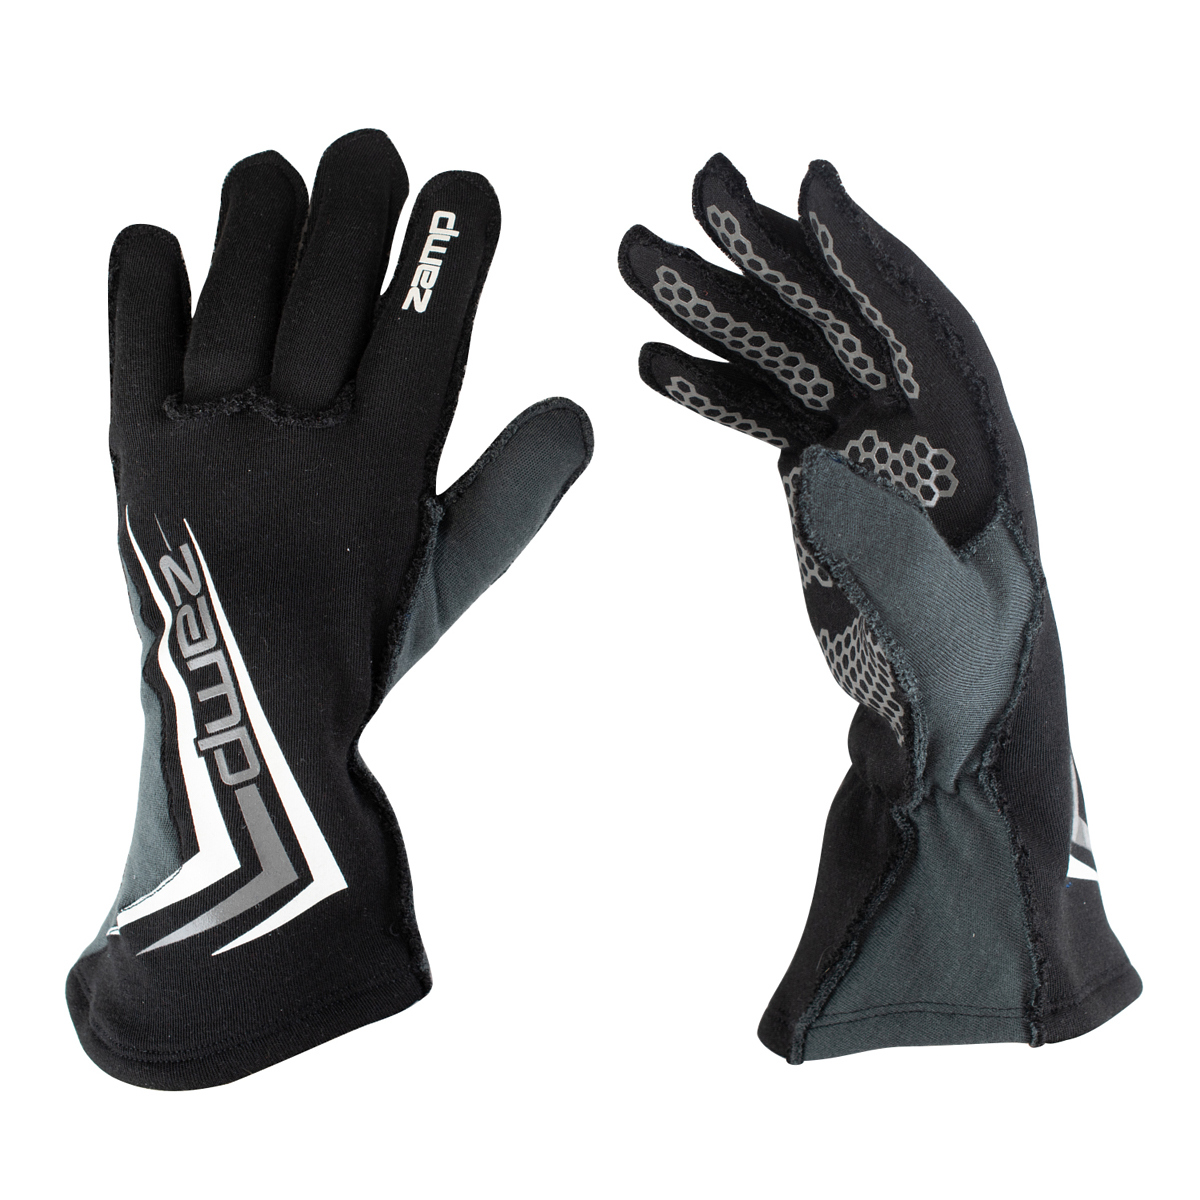 Zamp Racing RG200032XL Driving Gloves, ZR-60, SFI 3.3/5, Double Layer, Fire Retardant Fabric, Silicone Palm, Black, 2X-Large, Pair